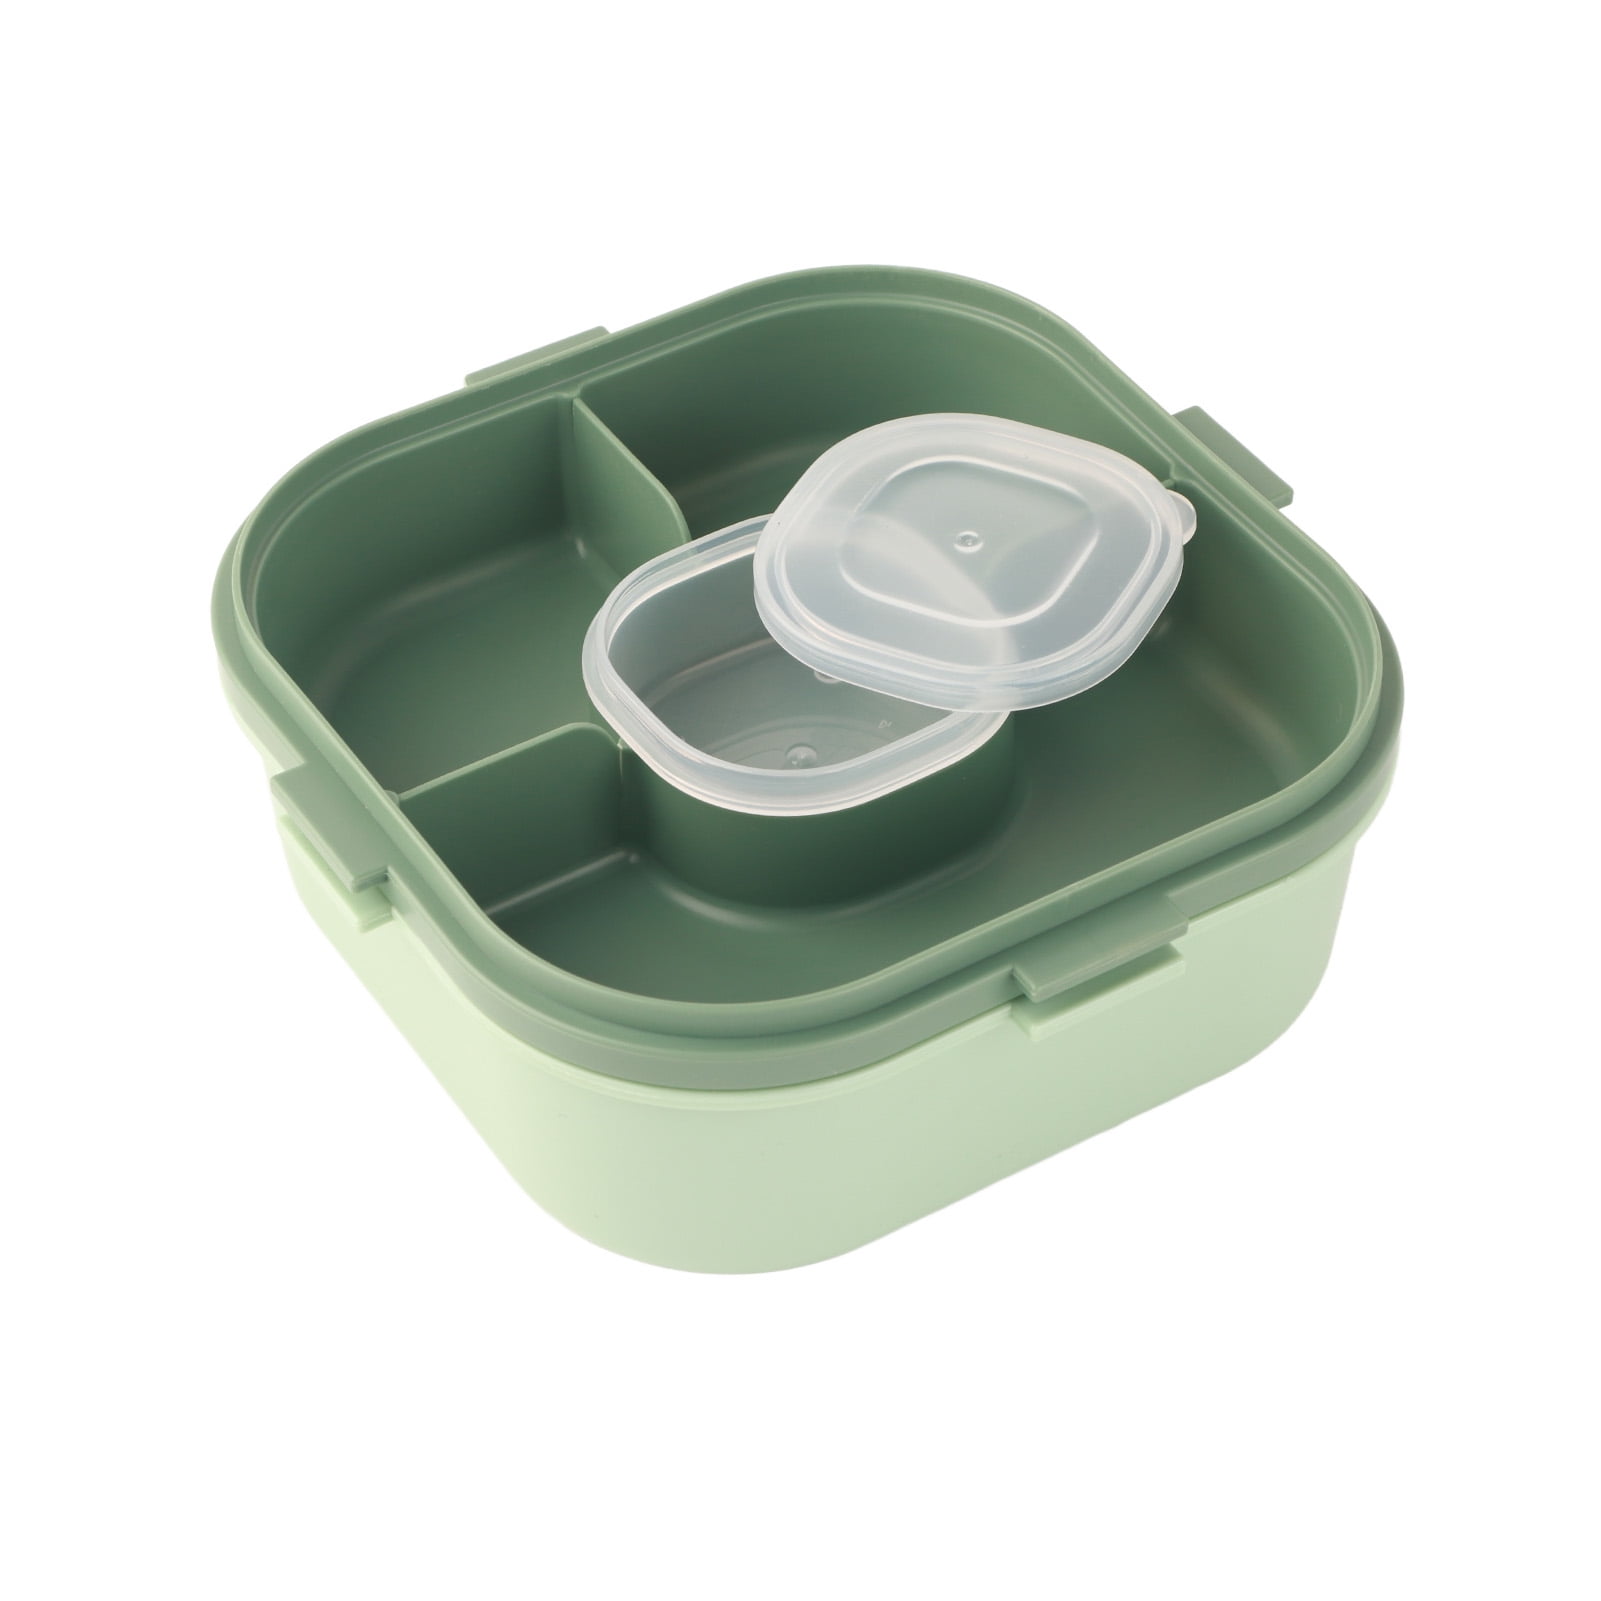 Lunch BoxesIdeal Lunch Container for KidsSnack Lunch Box for Kids and AdultsLunch Box with Compartments and A Dipping Sauce ContainerDishwasher Safe